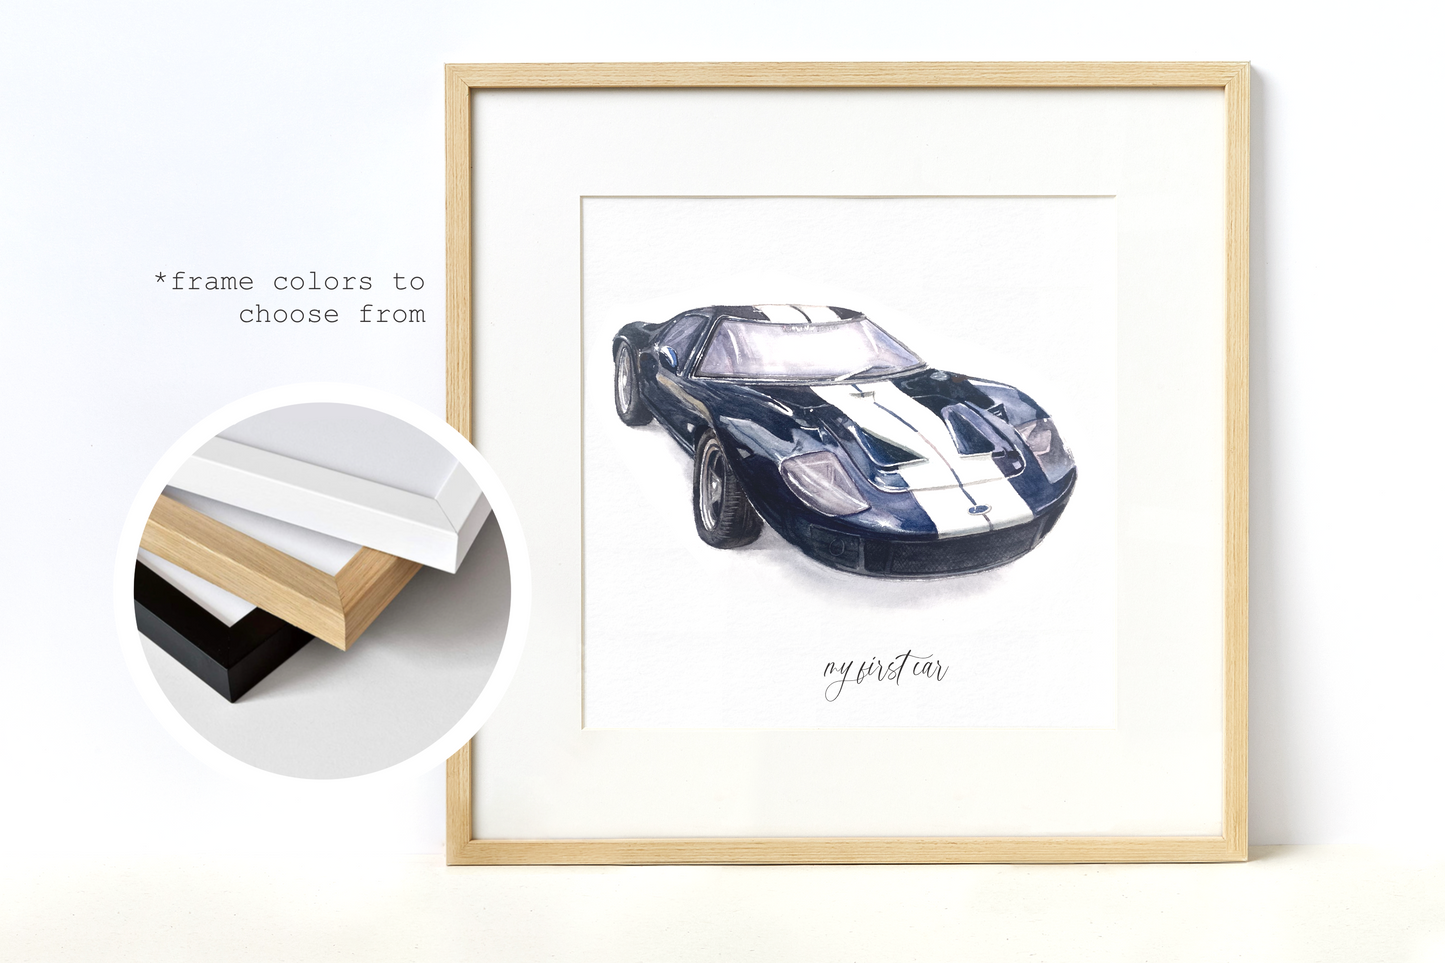 Watercolor Car Portrait from Photo, Custom Car Painting